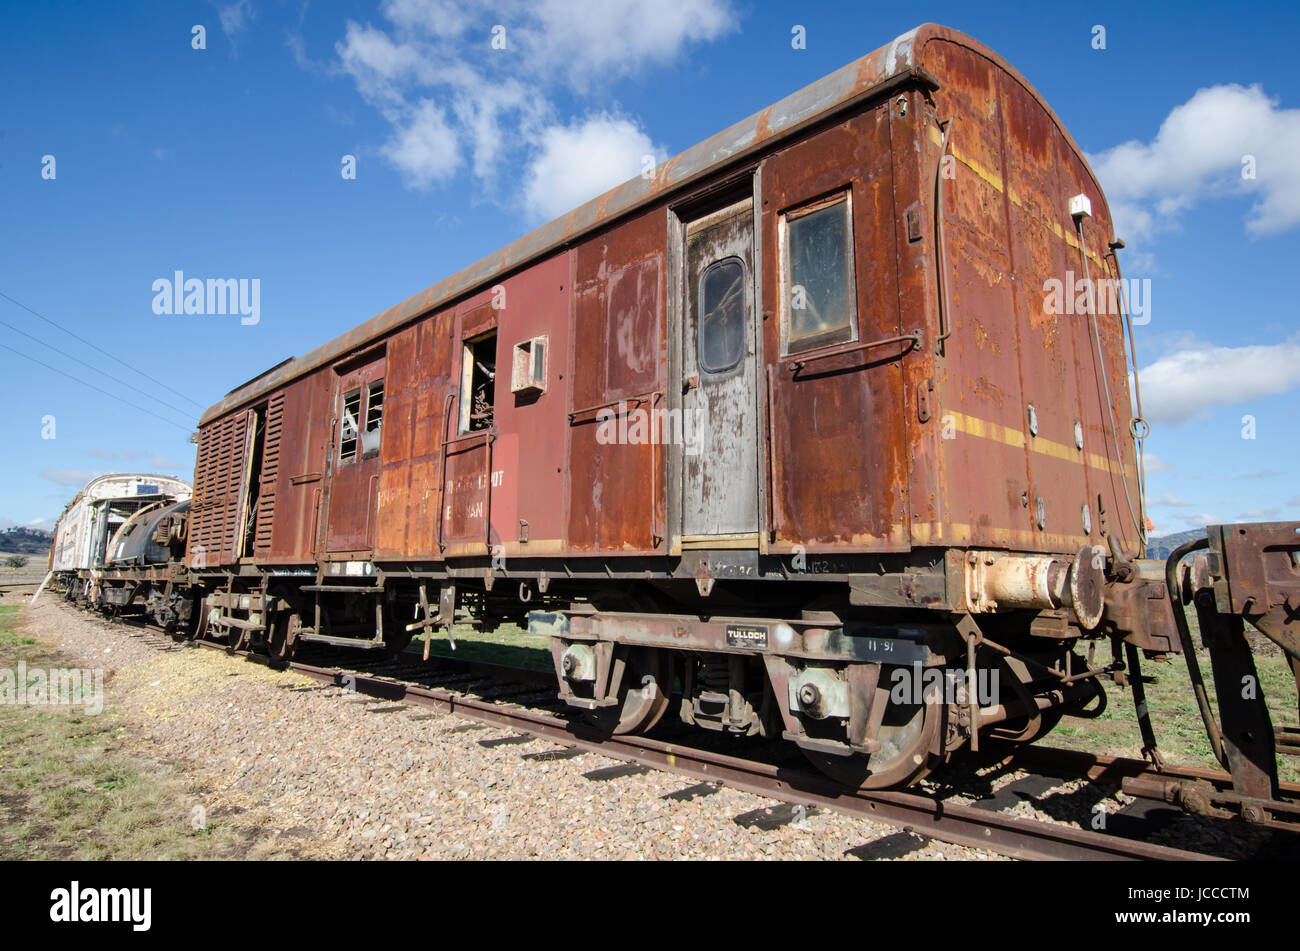 Old Railway Rolling Stock Carriage on a Siding. Stock Photo